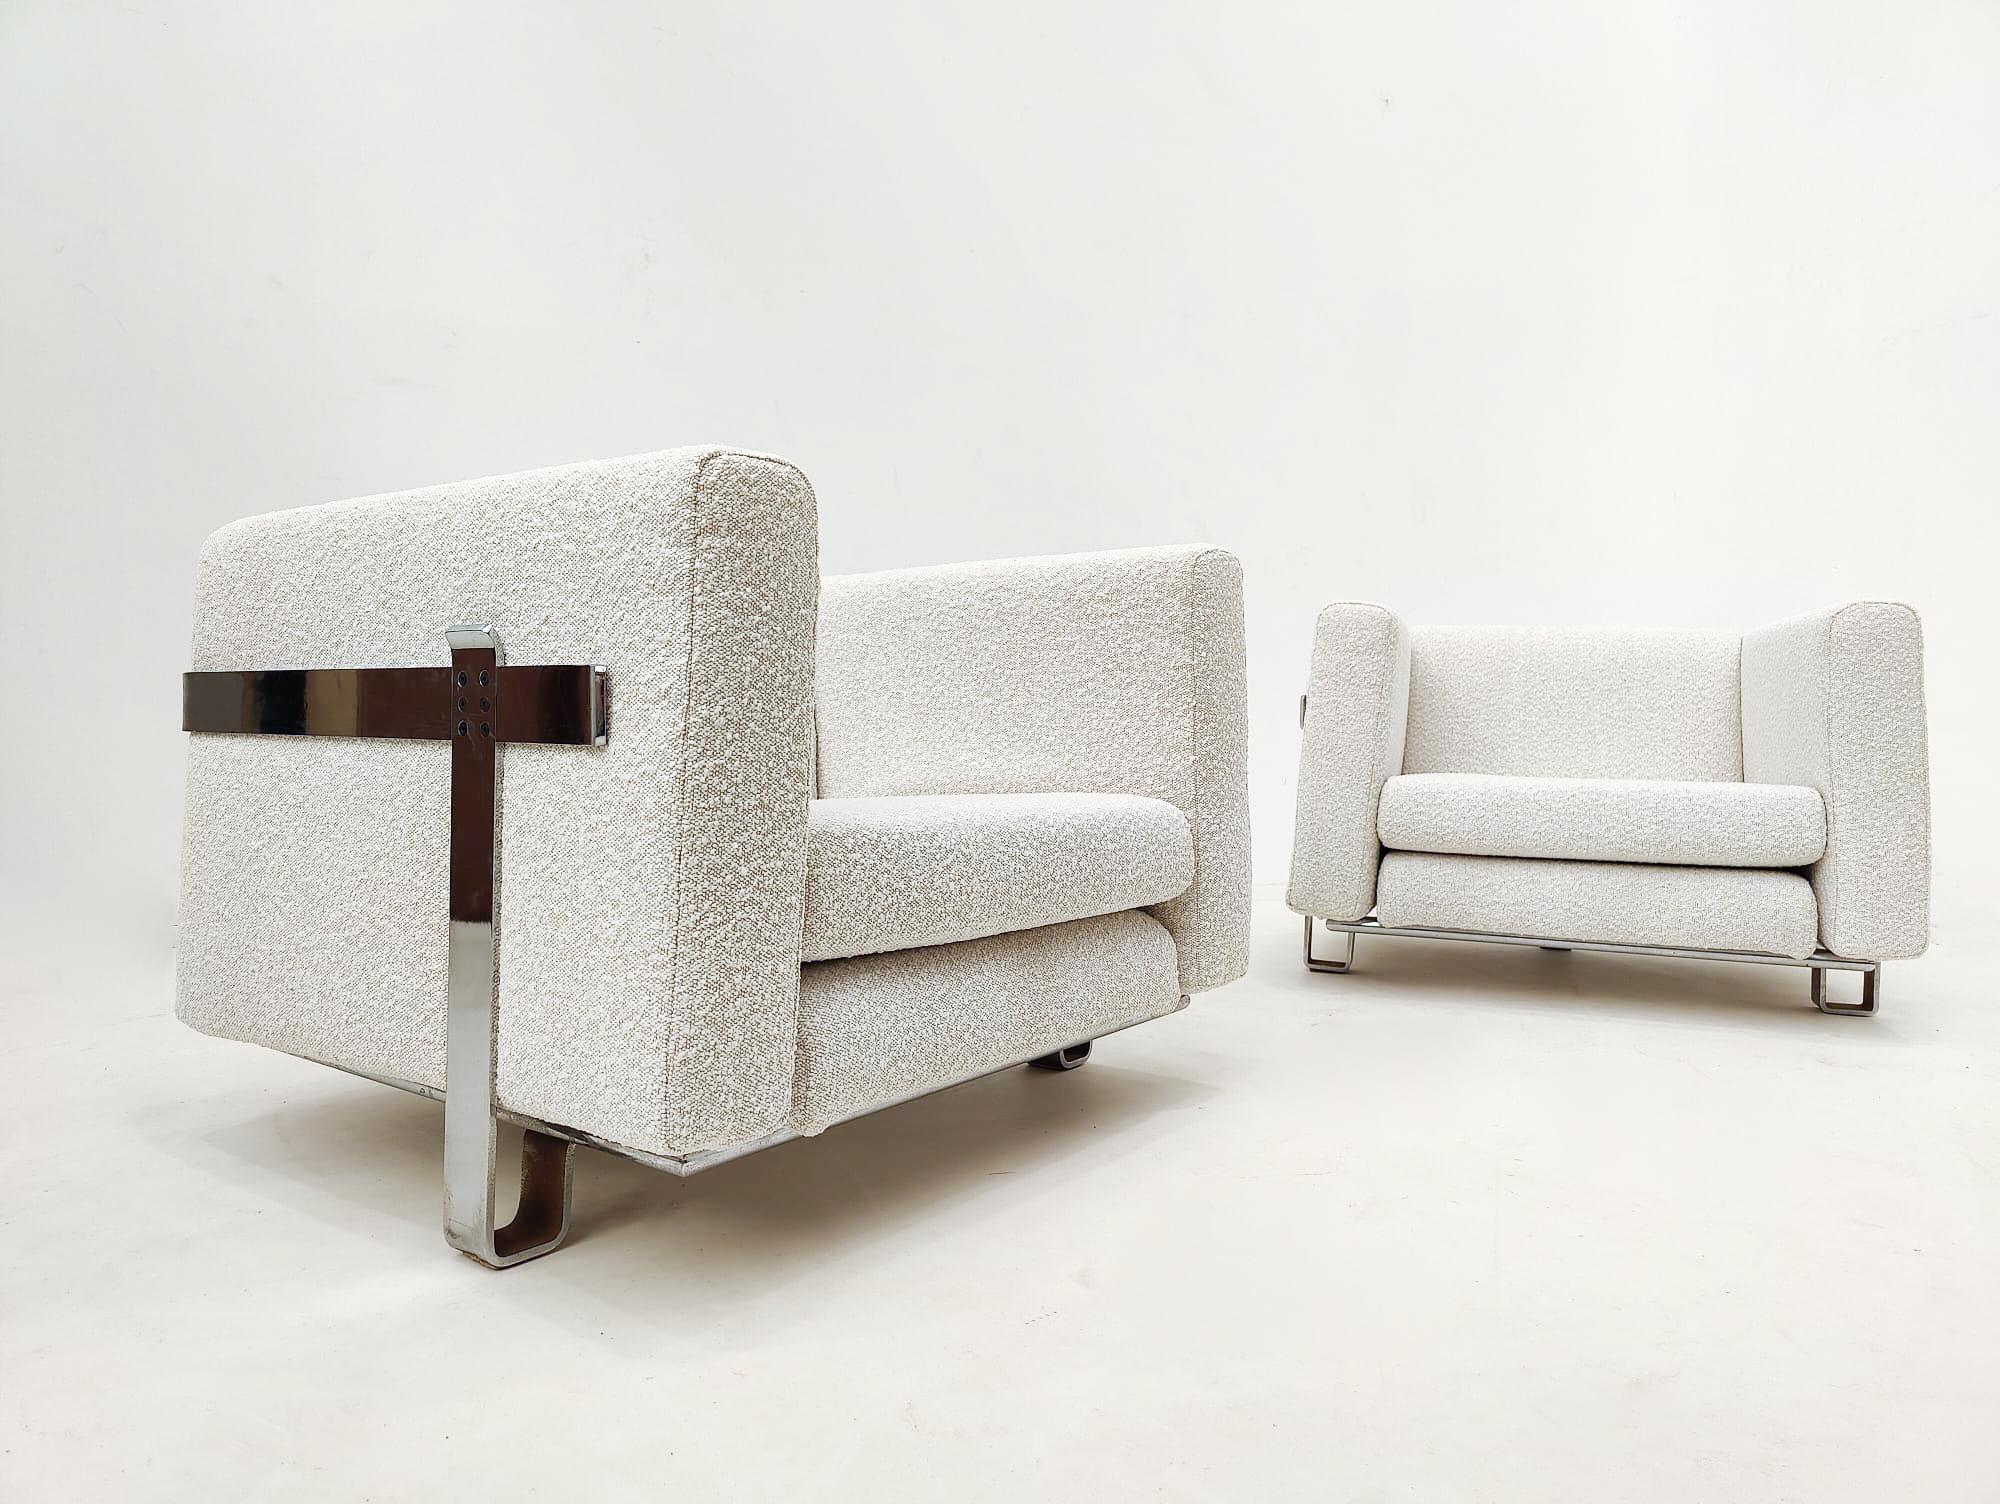 Mid-Century Modern pair of armchairs by Luigi Caccia Dominioni for Azucena, Chrome and Boucle Fabric, 1960s

New upholstery.